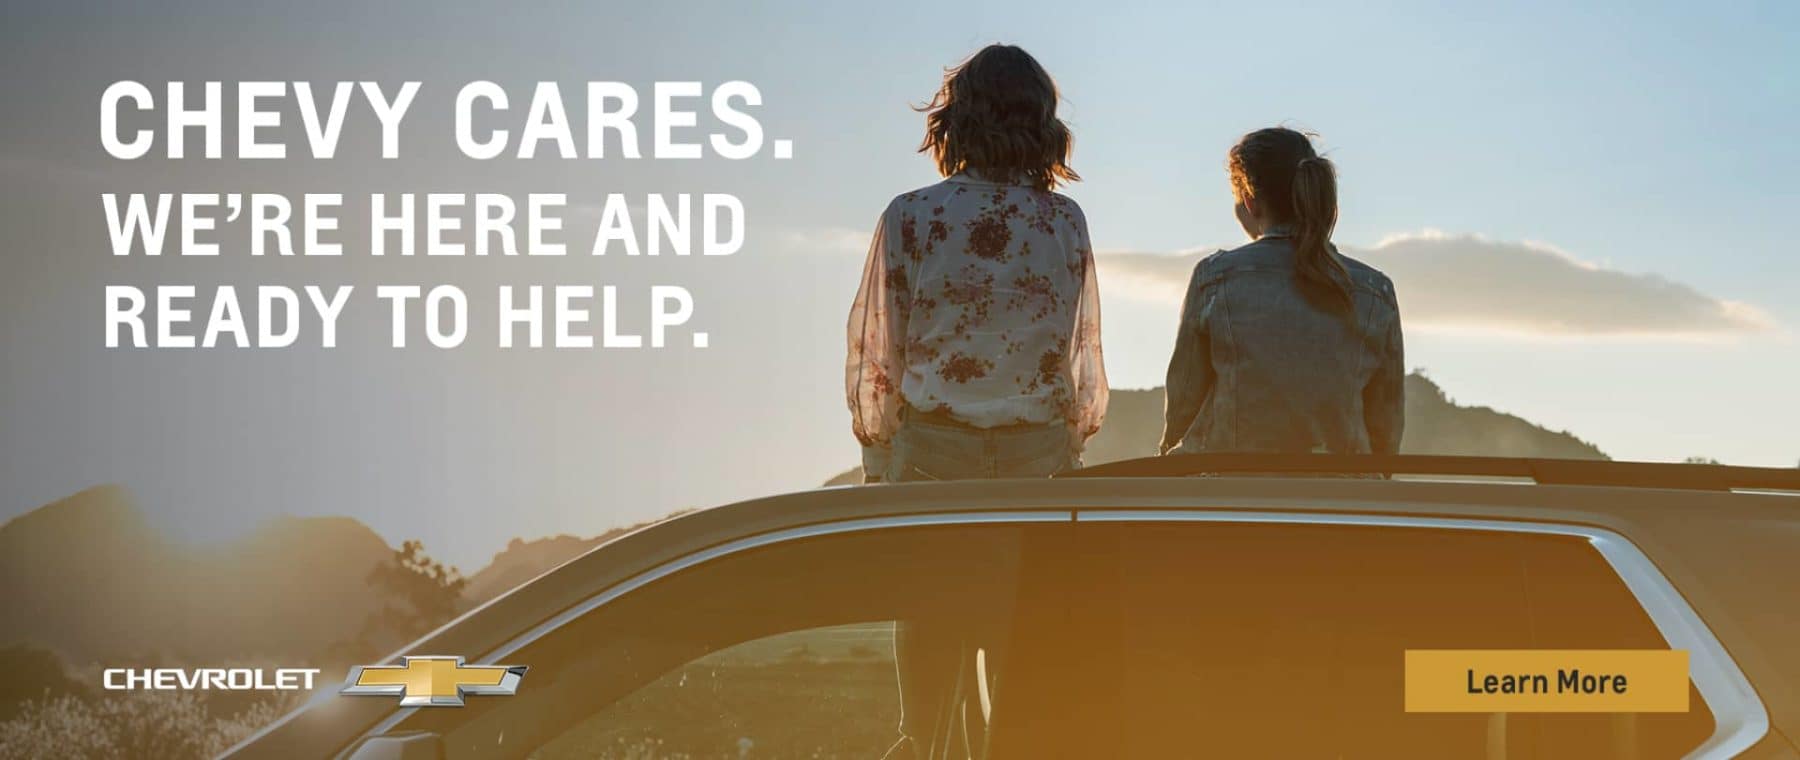 Chevy Cares. We're Here and Ready to Help.